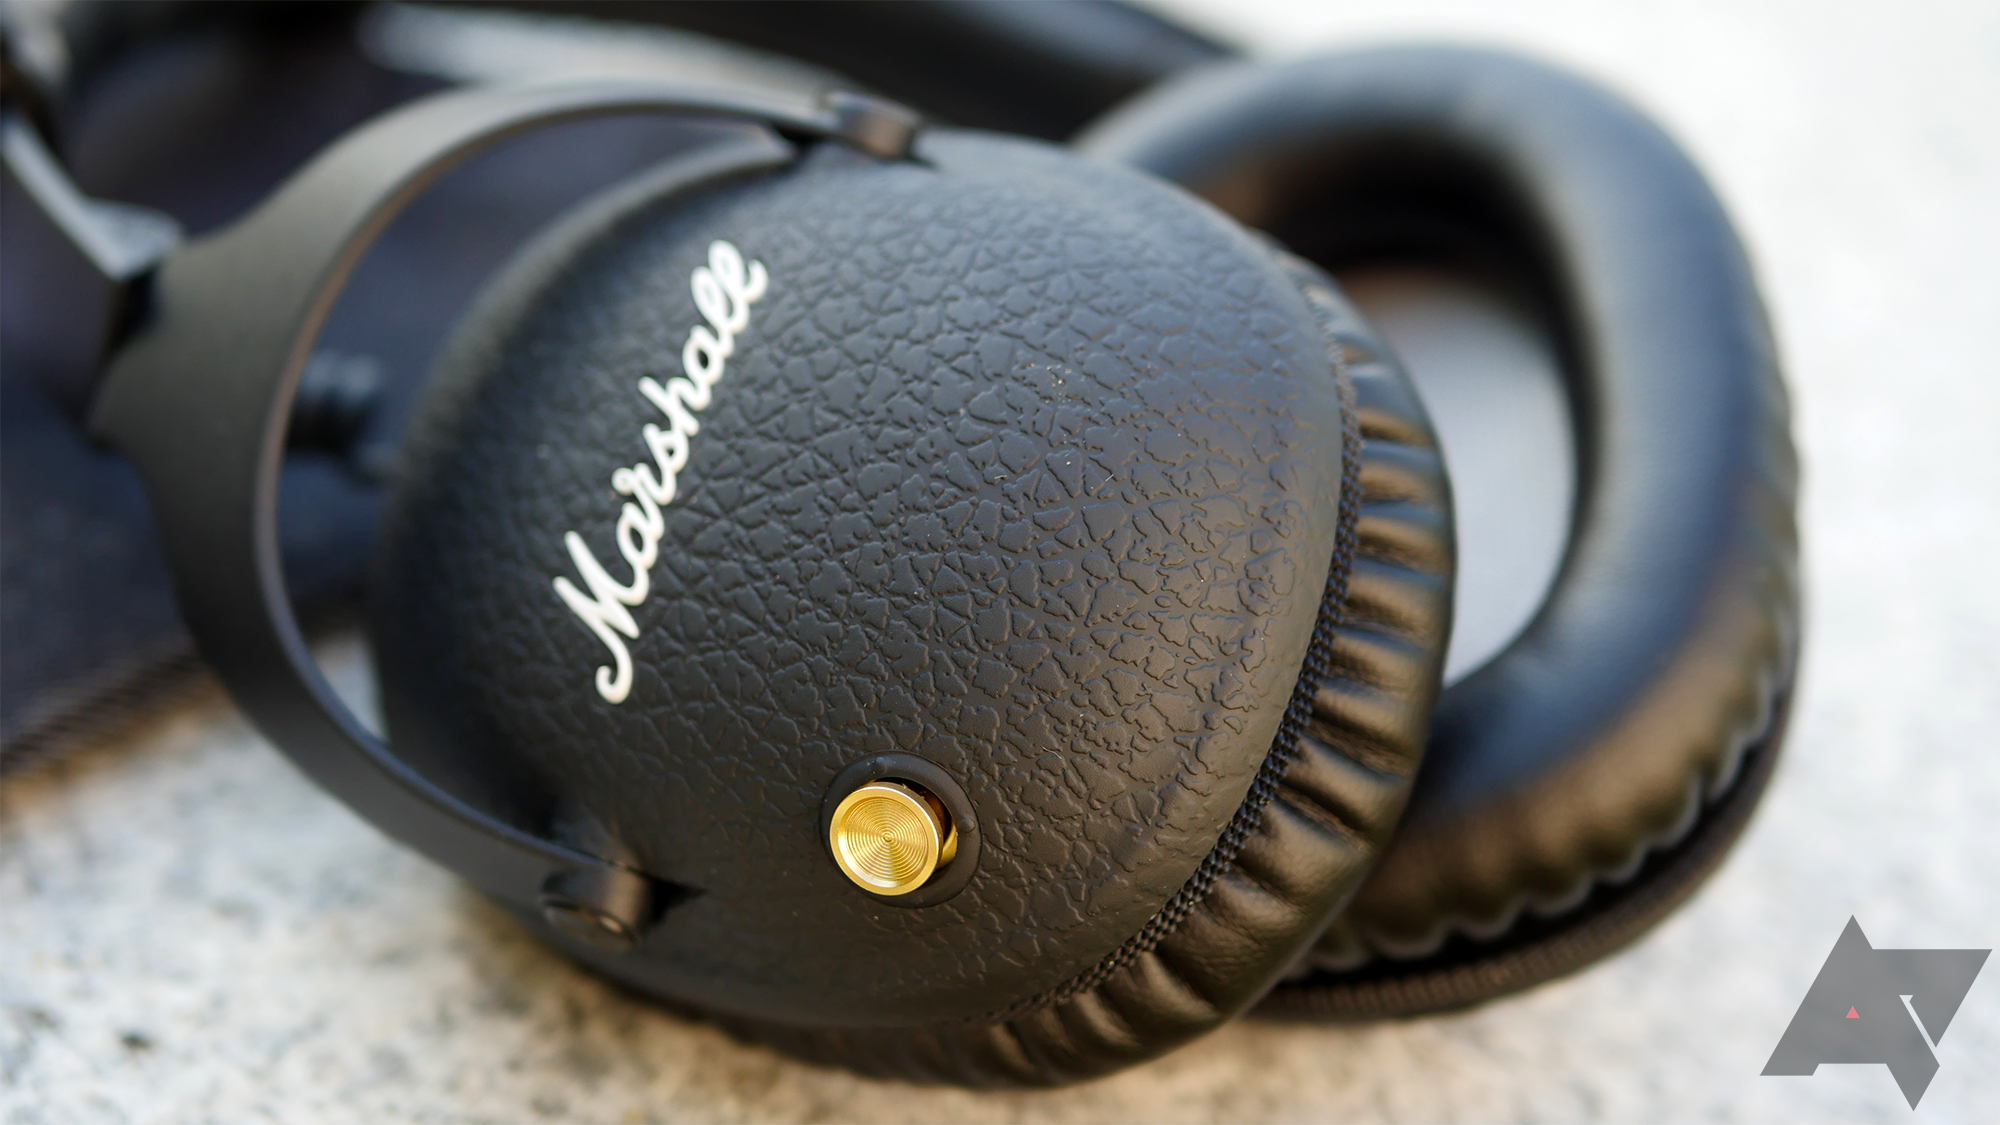 Marshall Monitor II A.N.C. review: Aggressive, confident styling with some  key functional upgrades